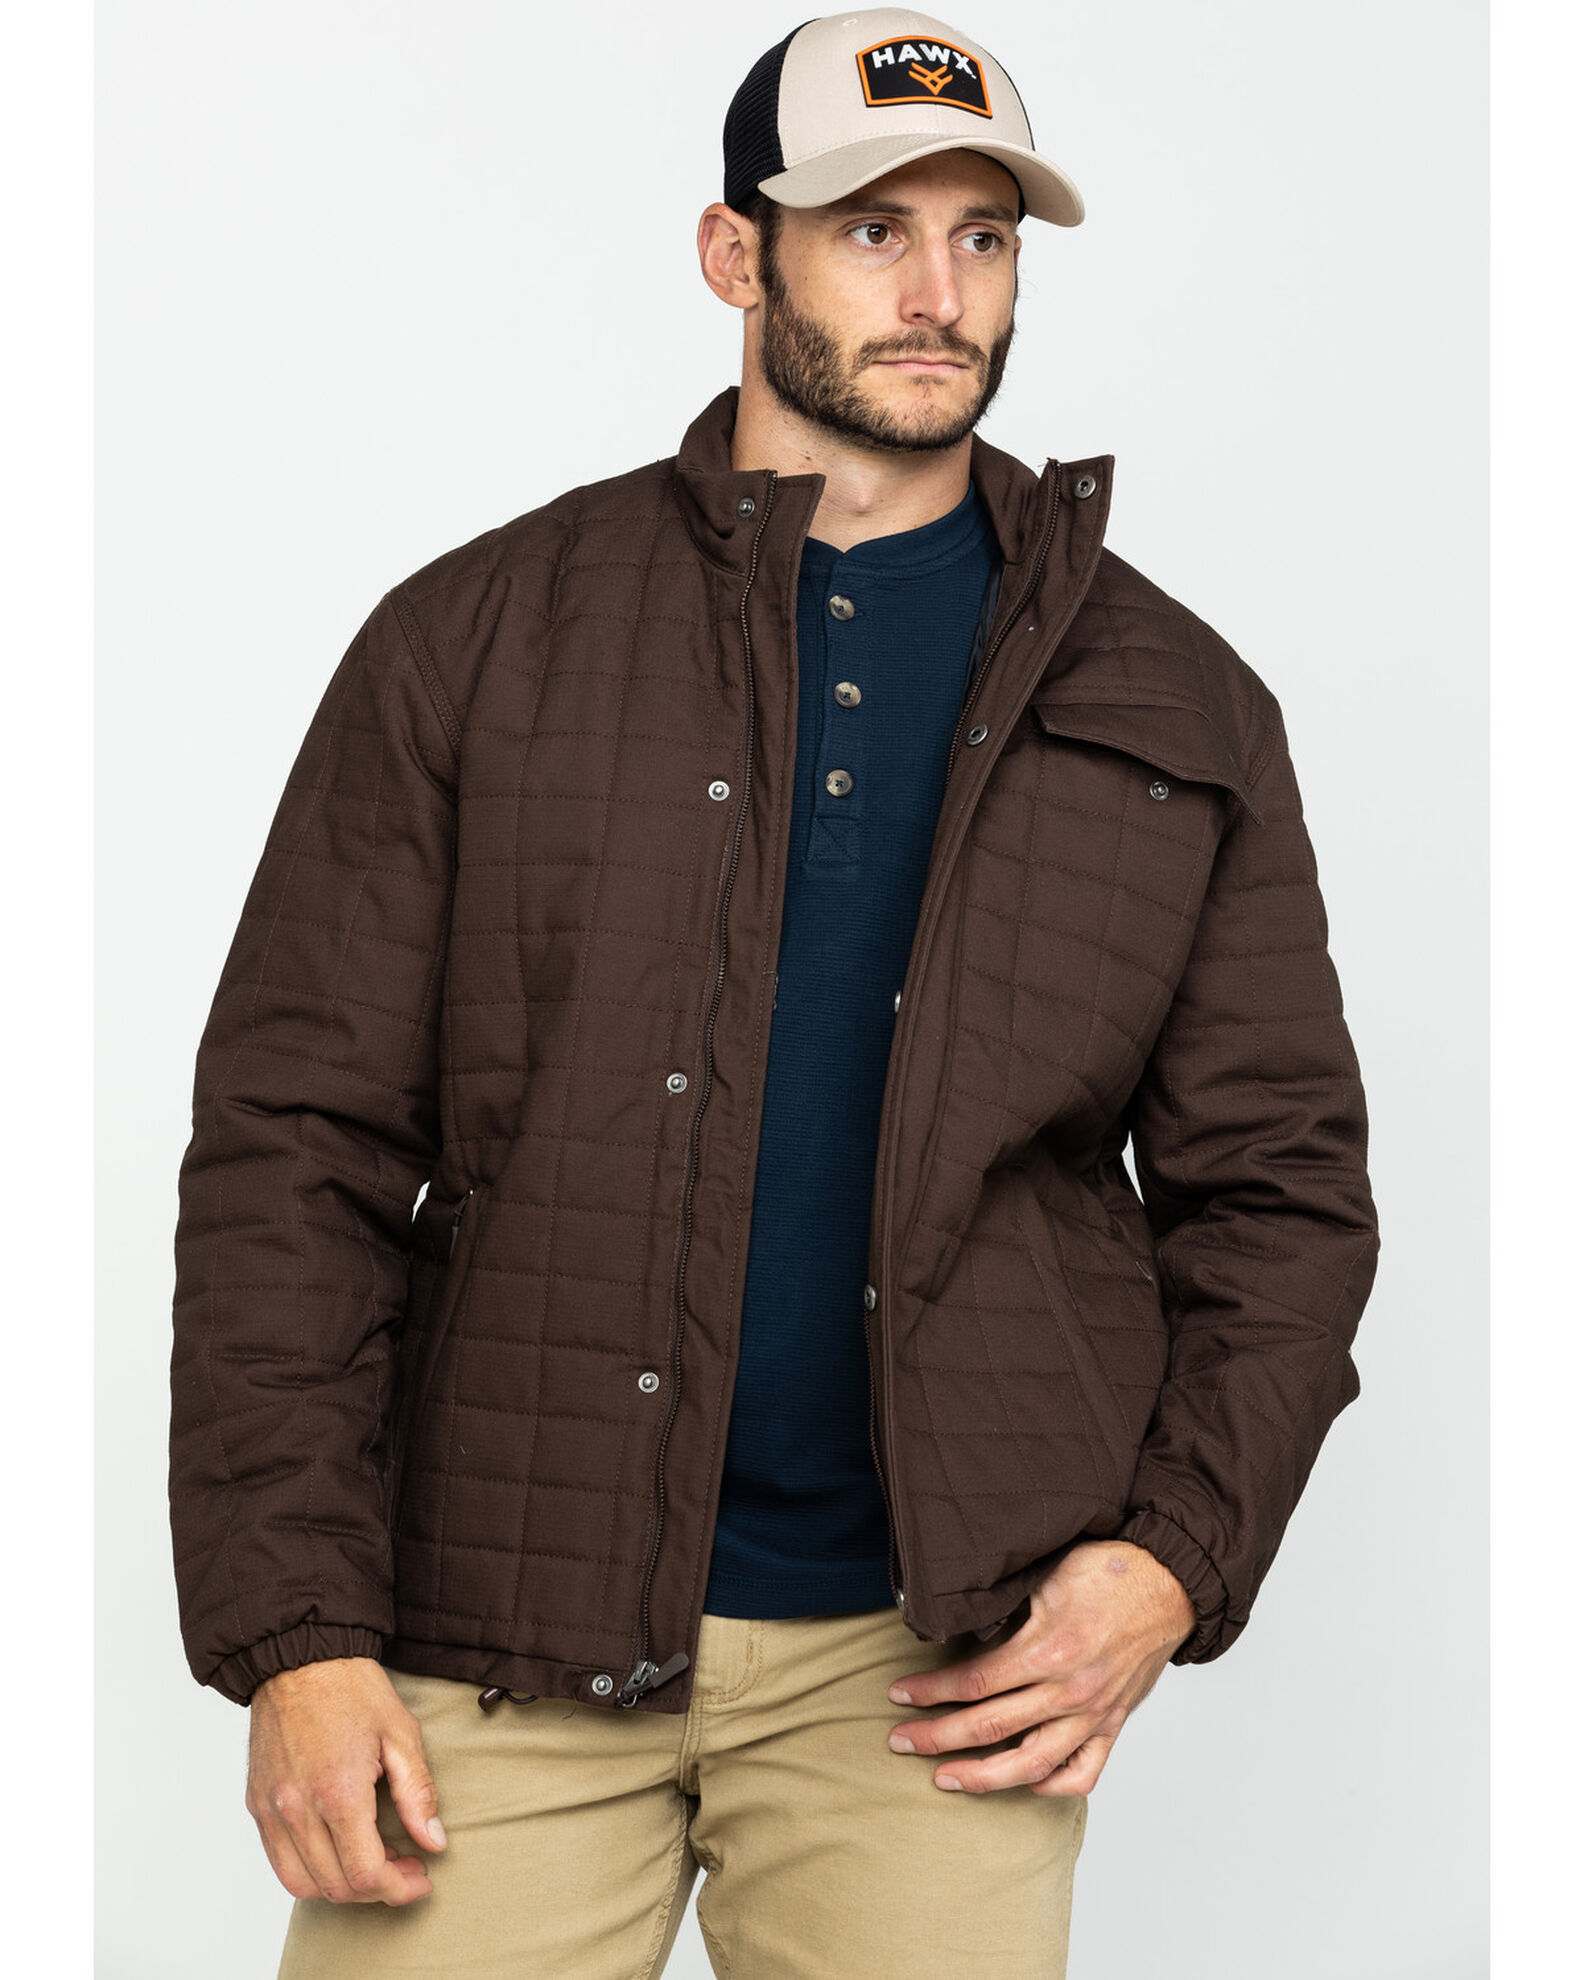 Wrangler Men's Chore Quilt Lined Jacket - Country Outfitter